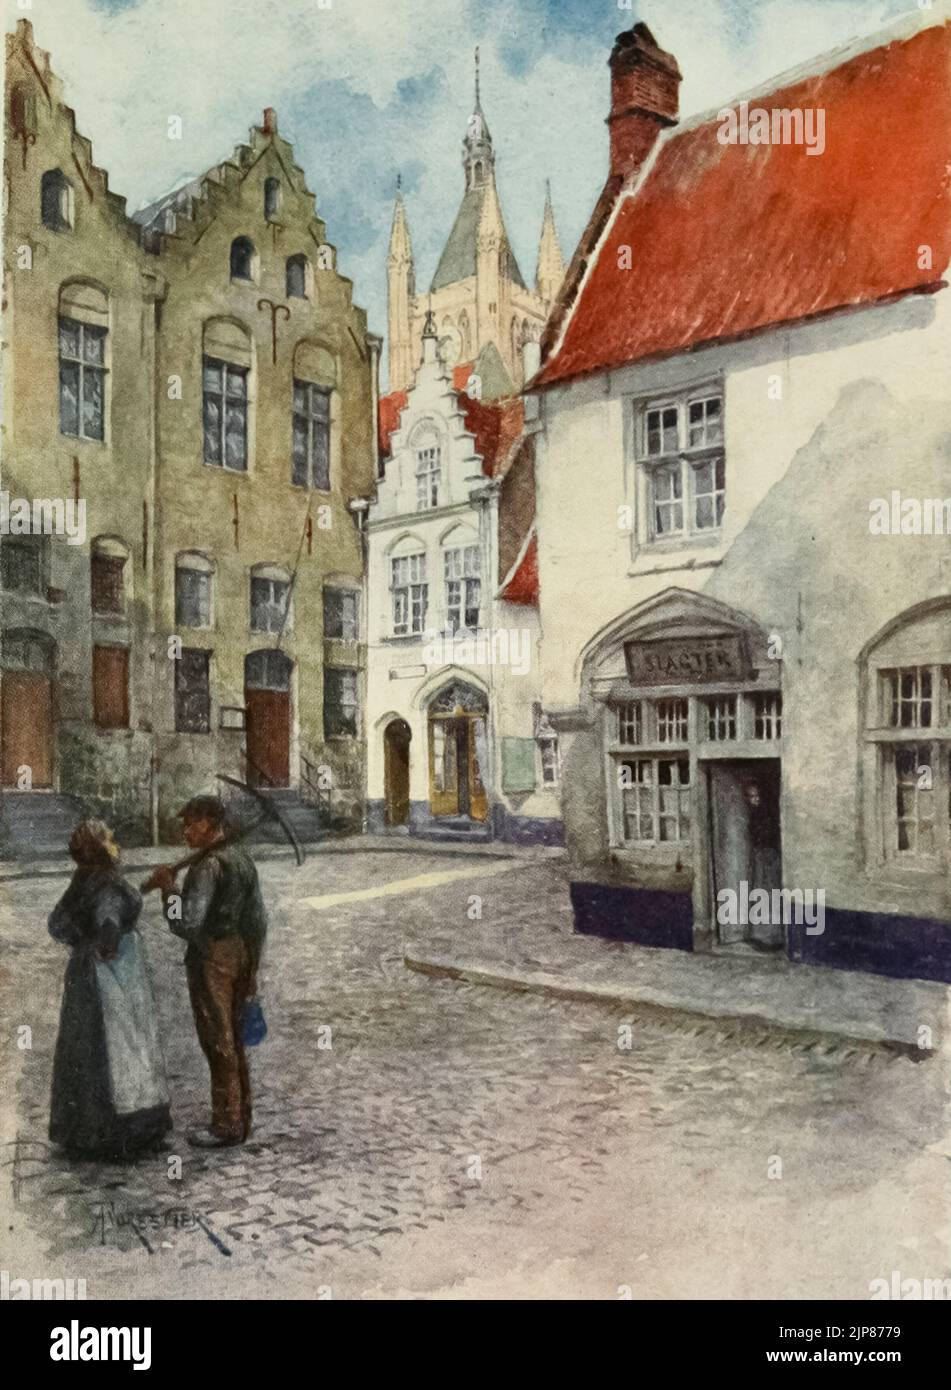 Ypres : Place du Musée (showing Top Part of the Belfry) Painted by Amedee Forestier, from the book '  Bruges and West Flanders ' by George William Thomson Omond, Publication date 1906 Publisher London : A. & C. Black Sir Amédée Forestier (Paris 1854 – 18 November 1930 London) was an Anglo-French artist and illustrator who specialised in historical and prehistoric scenes, and landscapes. Stock Photo